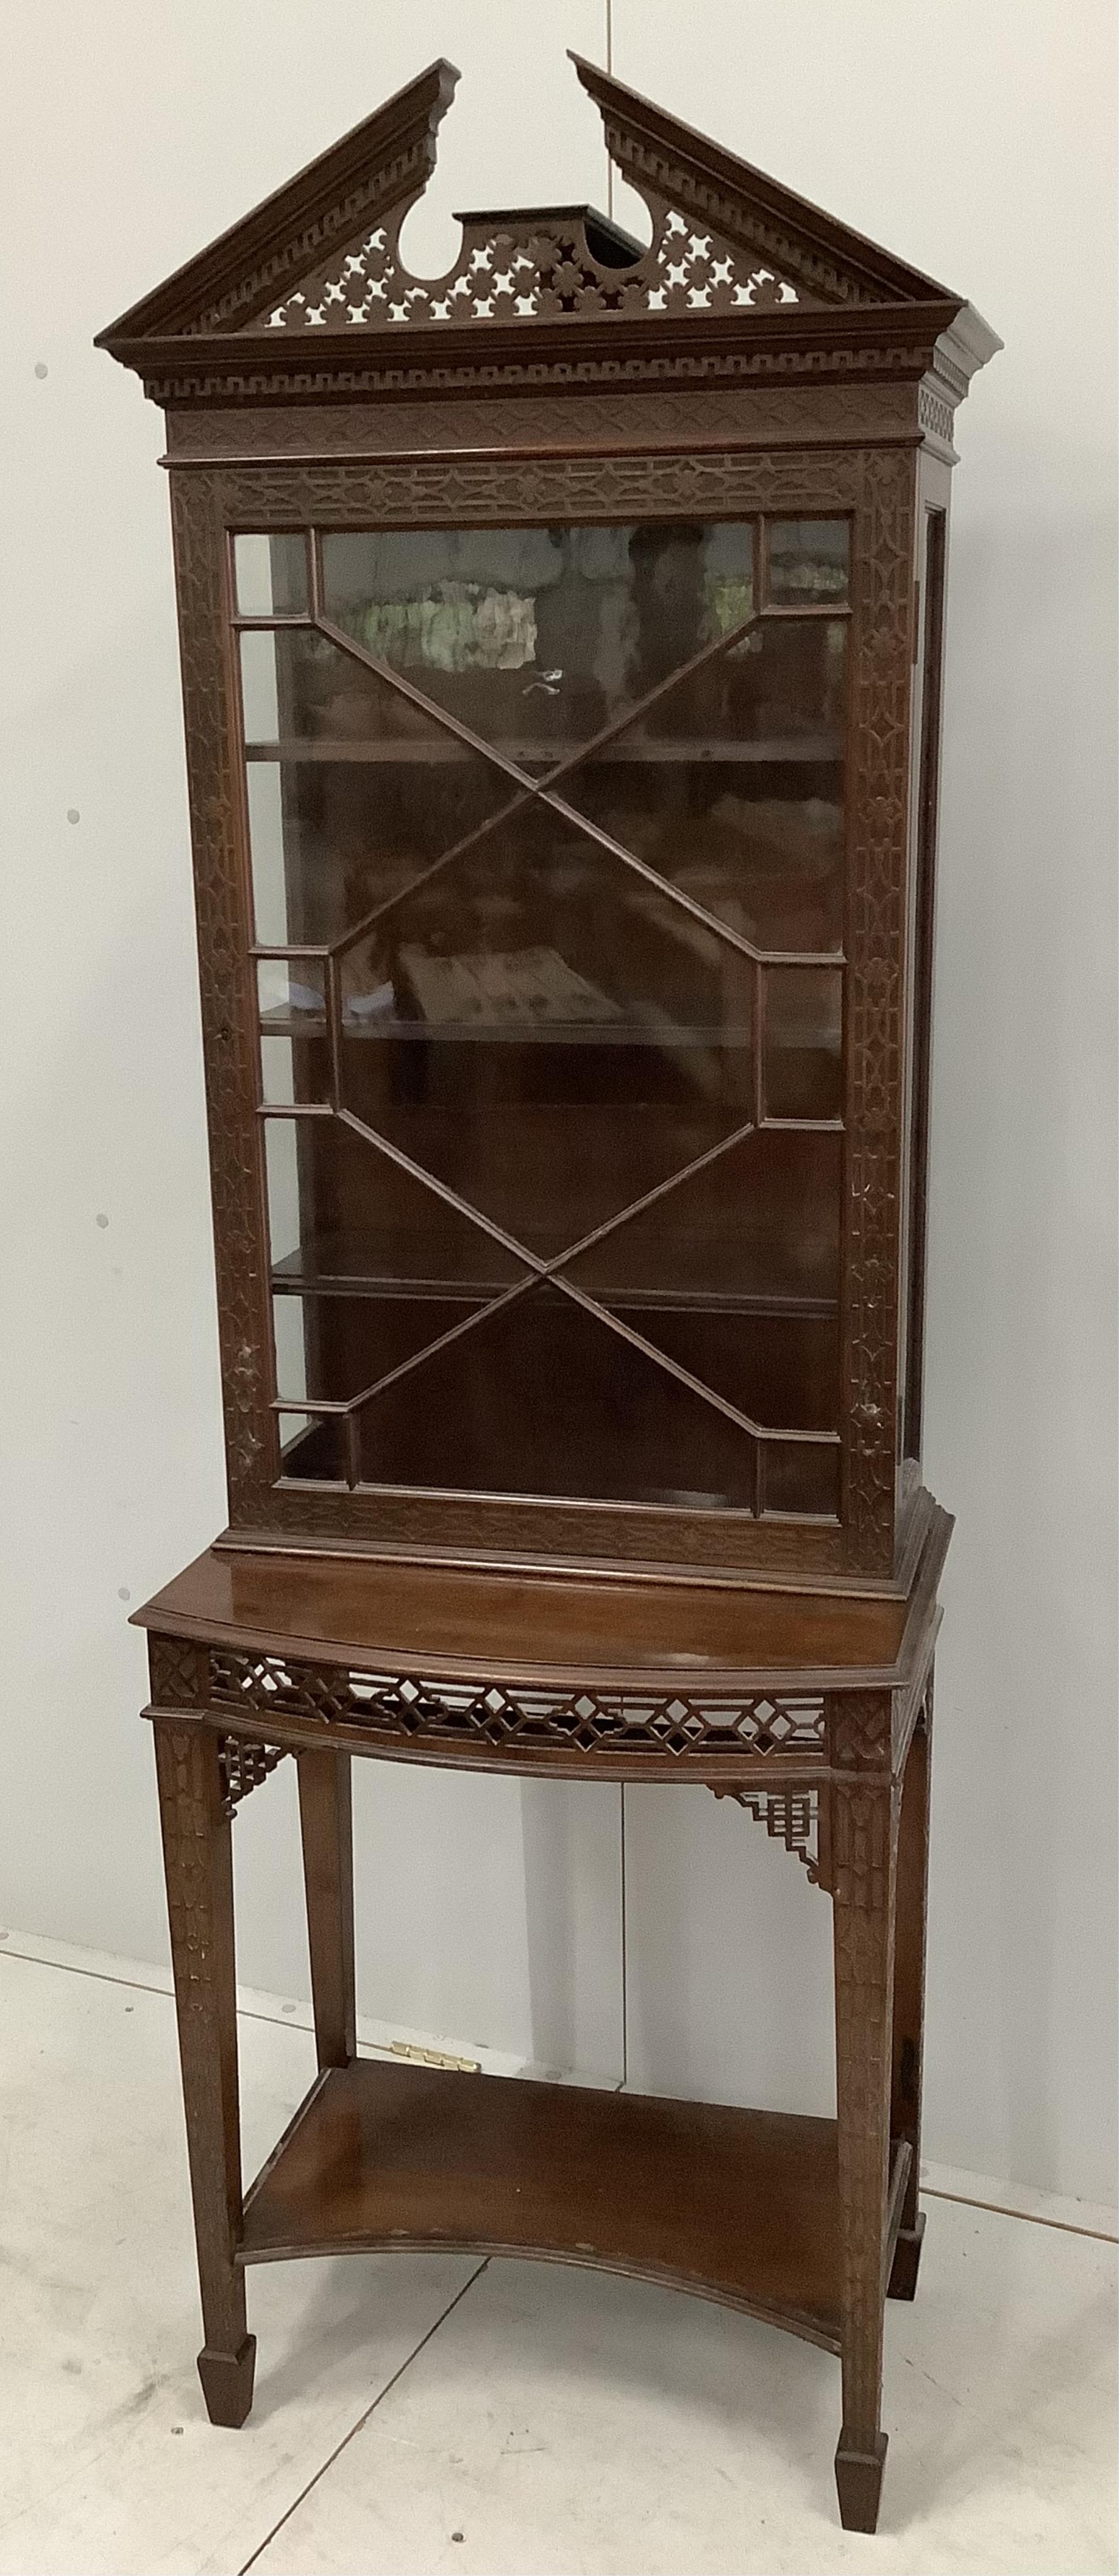 An Edwardian Chippendale Revival blind fret mahogany bow front display cabinet, width 62cm, depth 40cm, height 188cm. Condition - poor